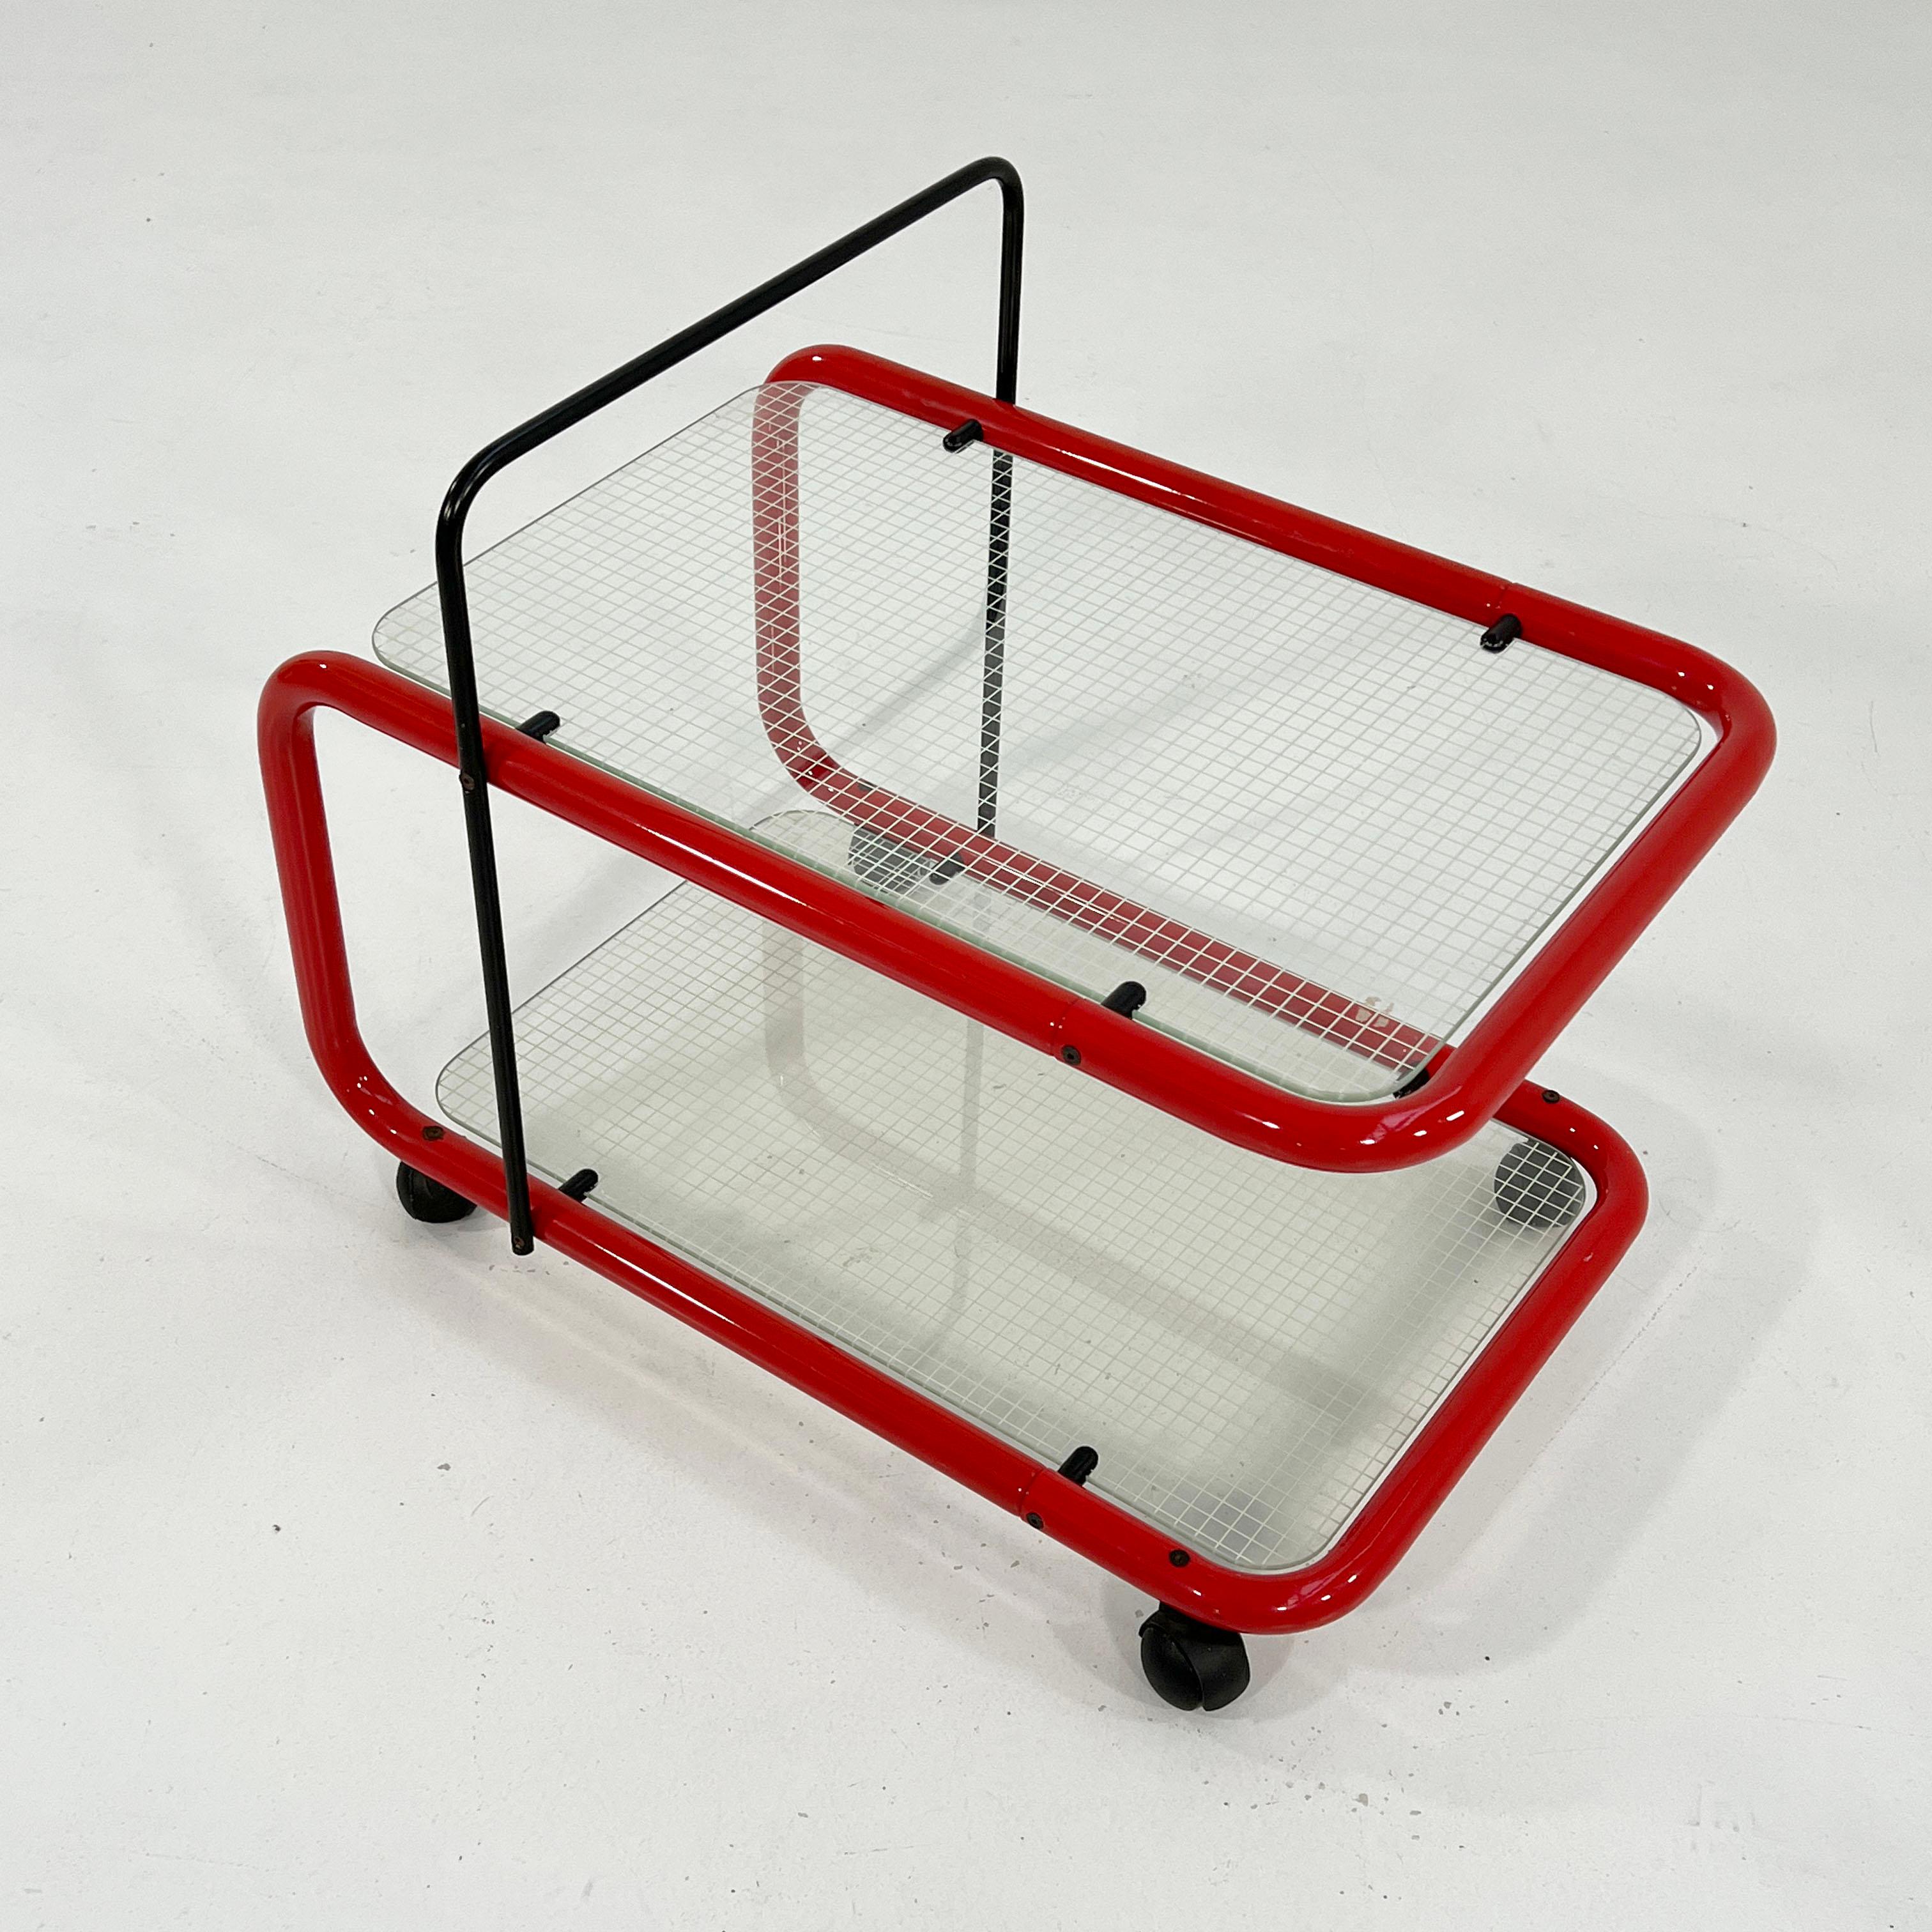 Design Period - Eighties
Measurements - Width 48 cm x Depth 69 cm x Height 55 cm
Materials - Metal, Glass
Color - Red, Black, White
Condition - Good 
Comments - Light wear consistent with age and use. 